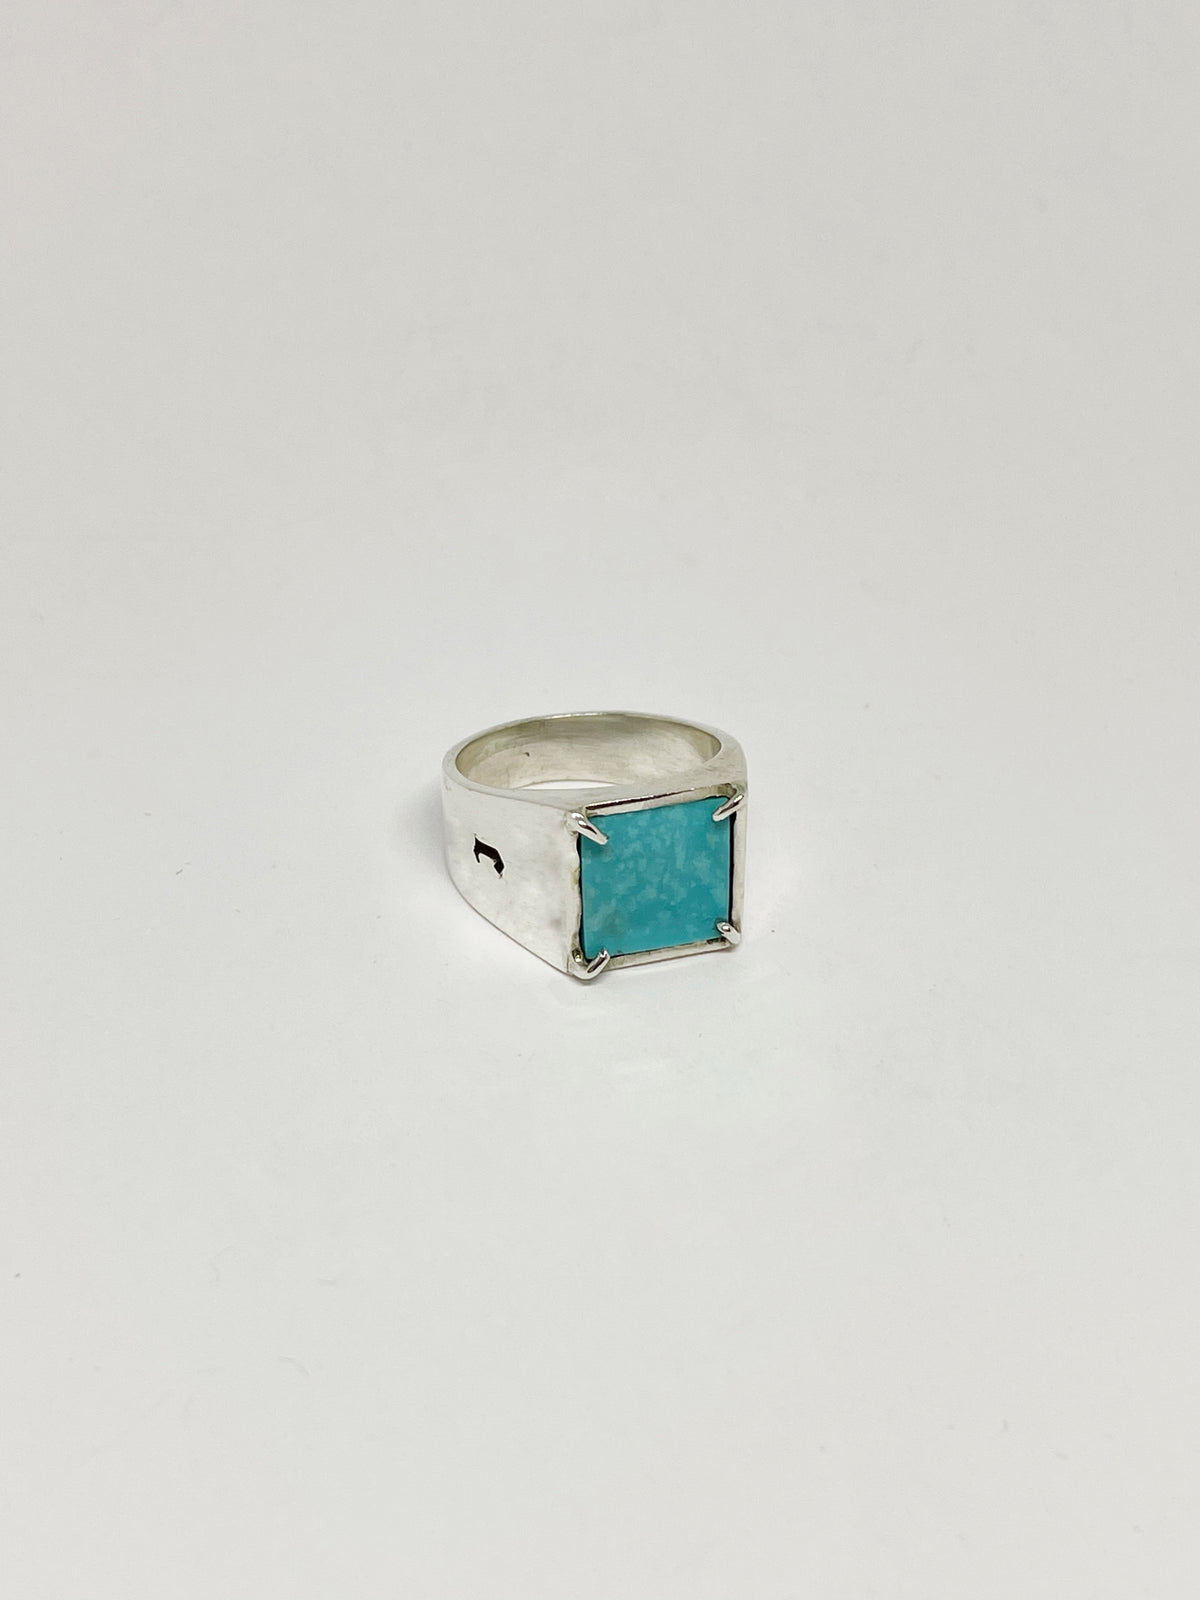 Square ring with stone